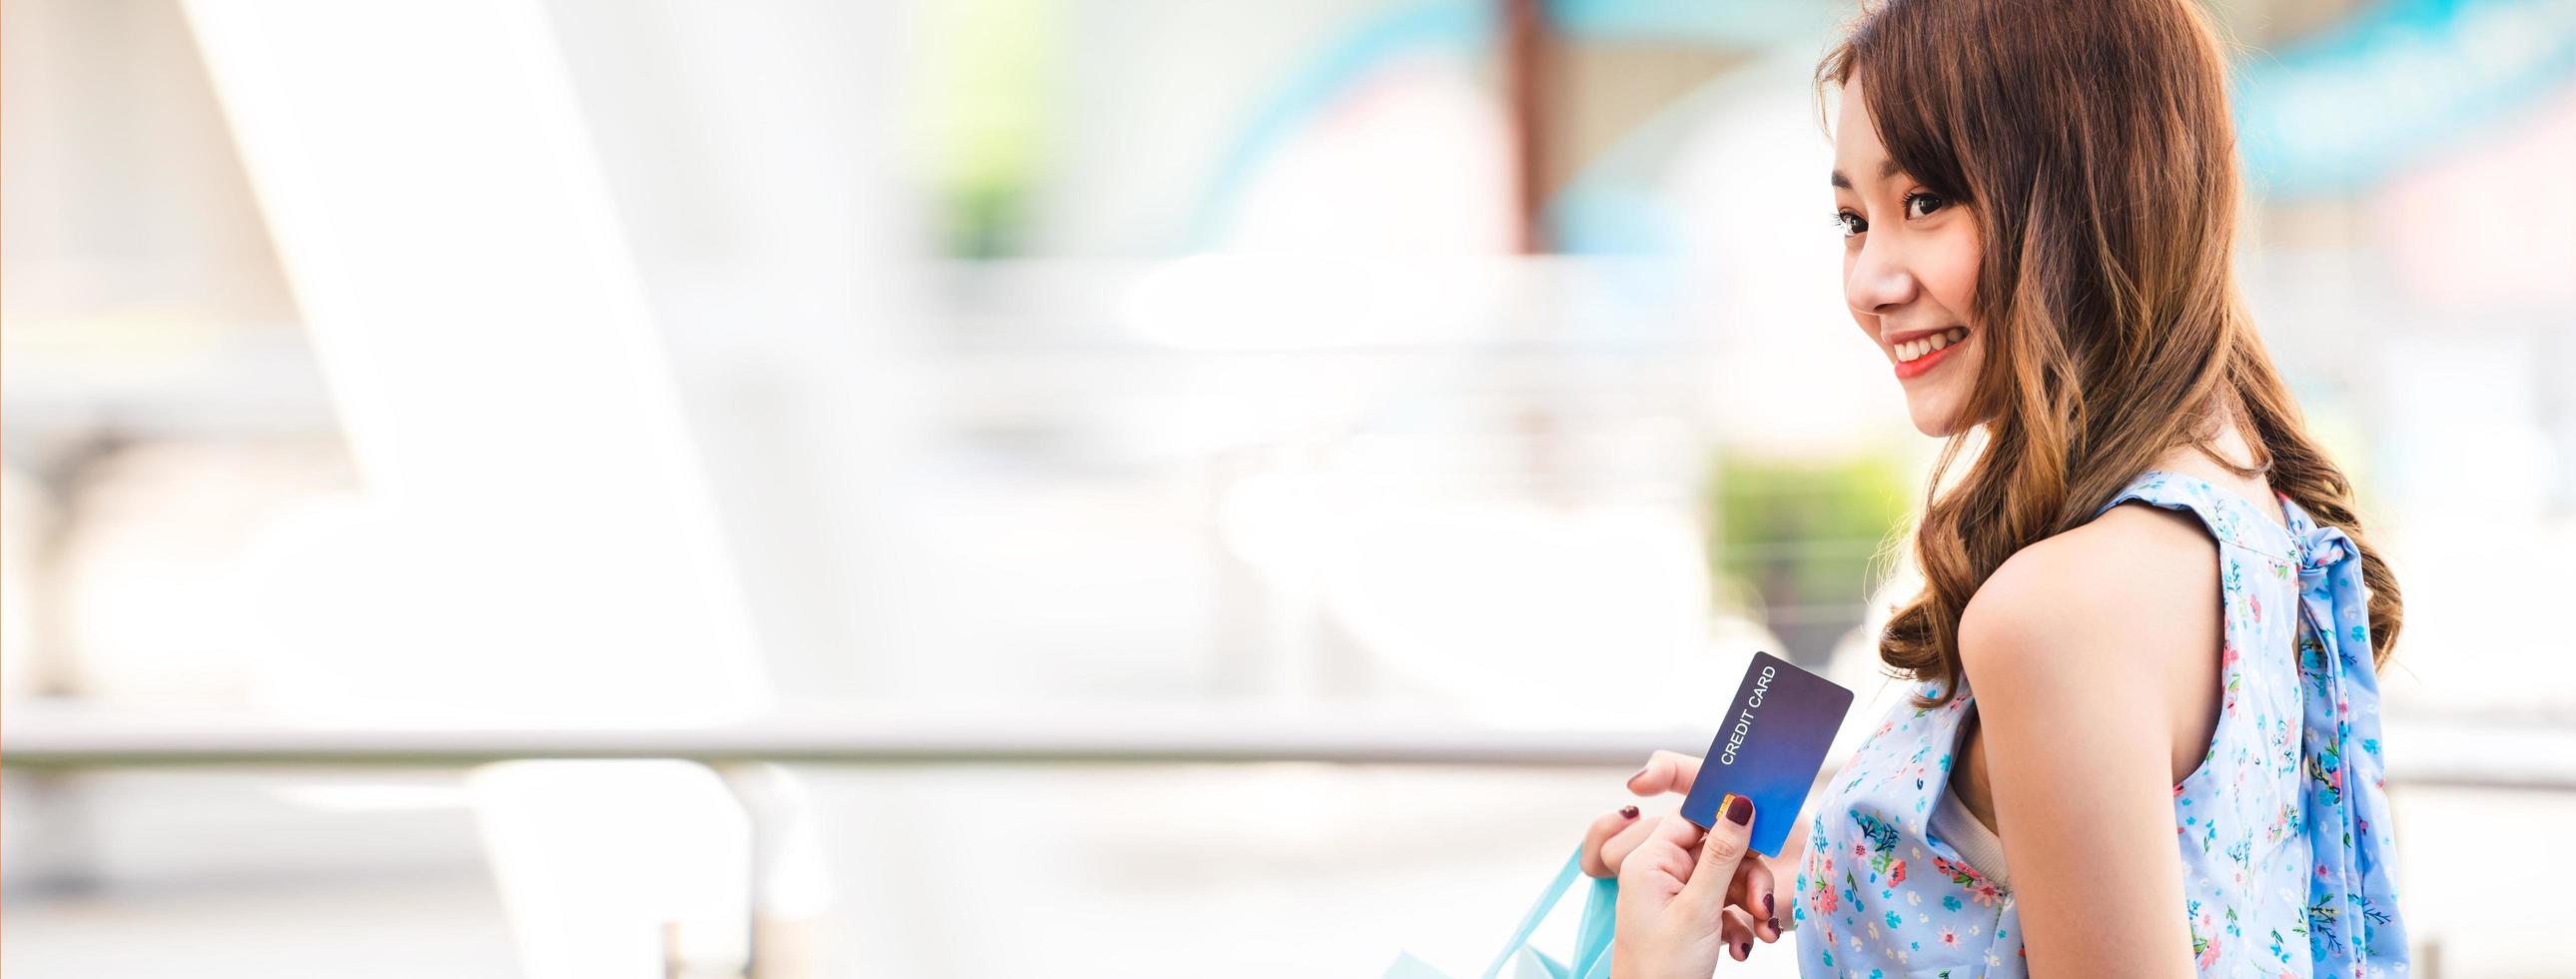 Shopping woman with credit card banner size photo